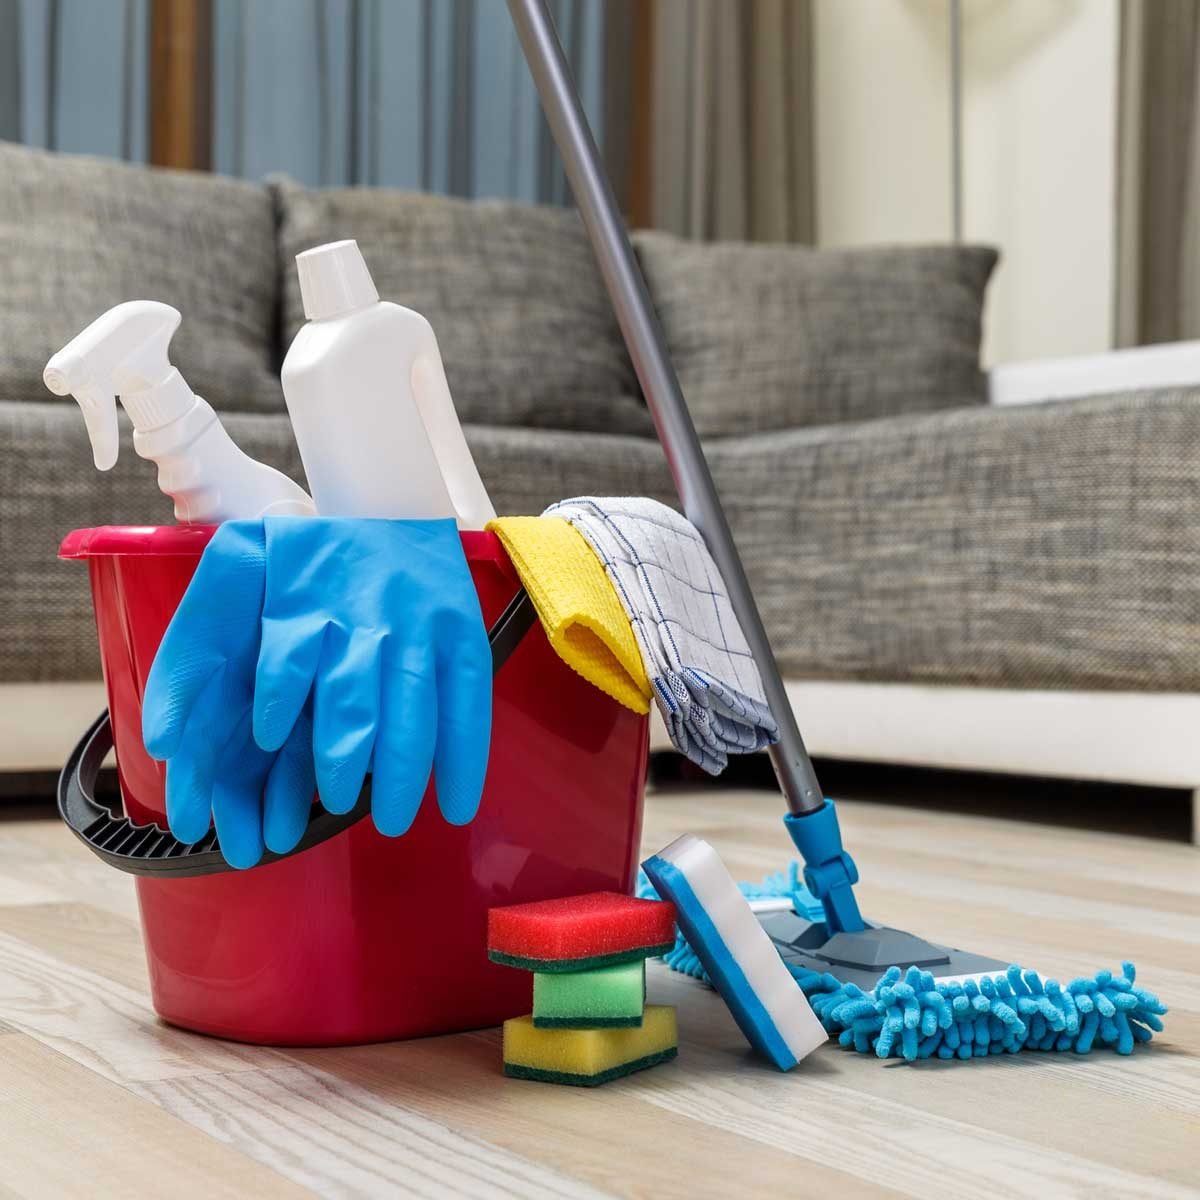 How to clean your cleaning supplies - The Washington Post